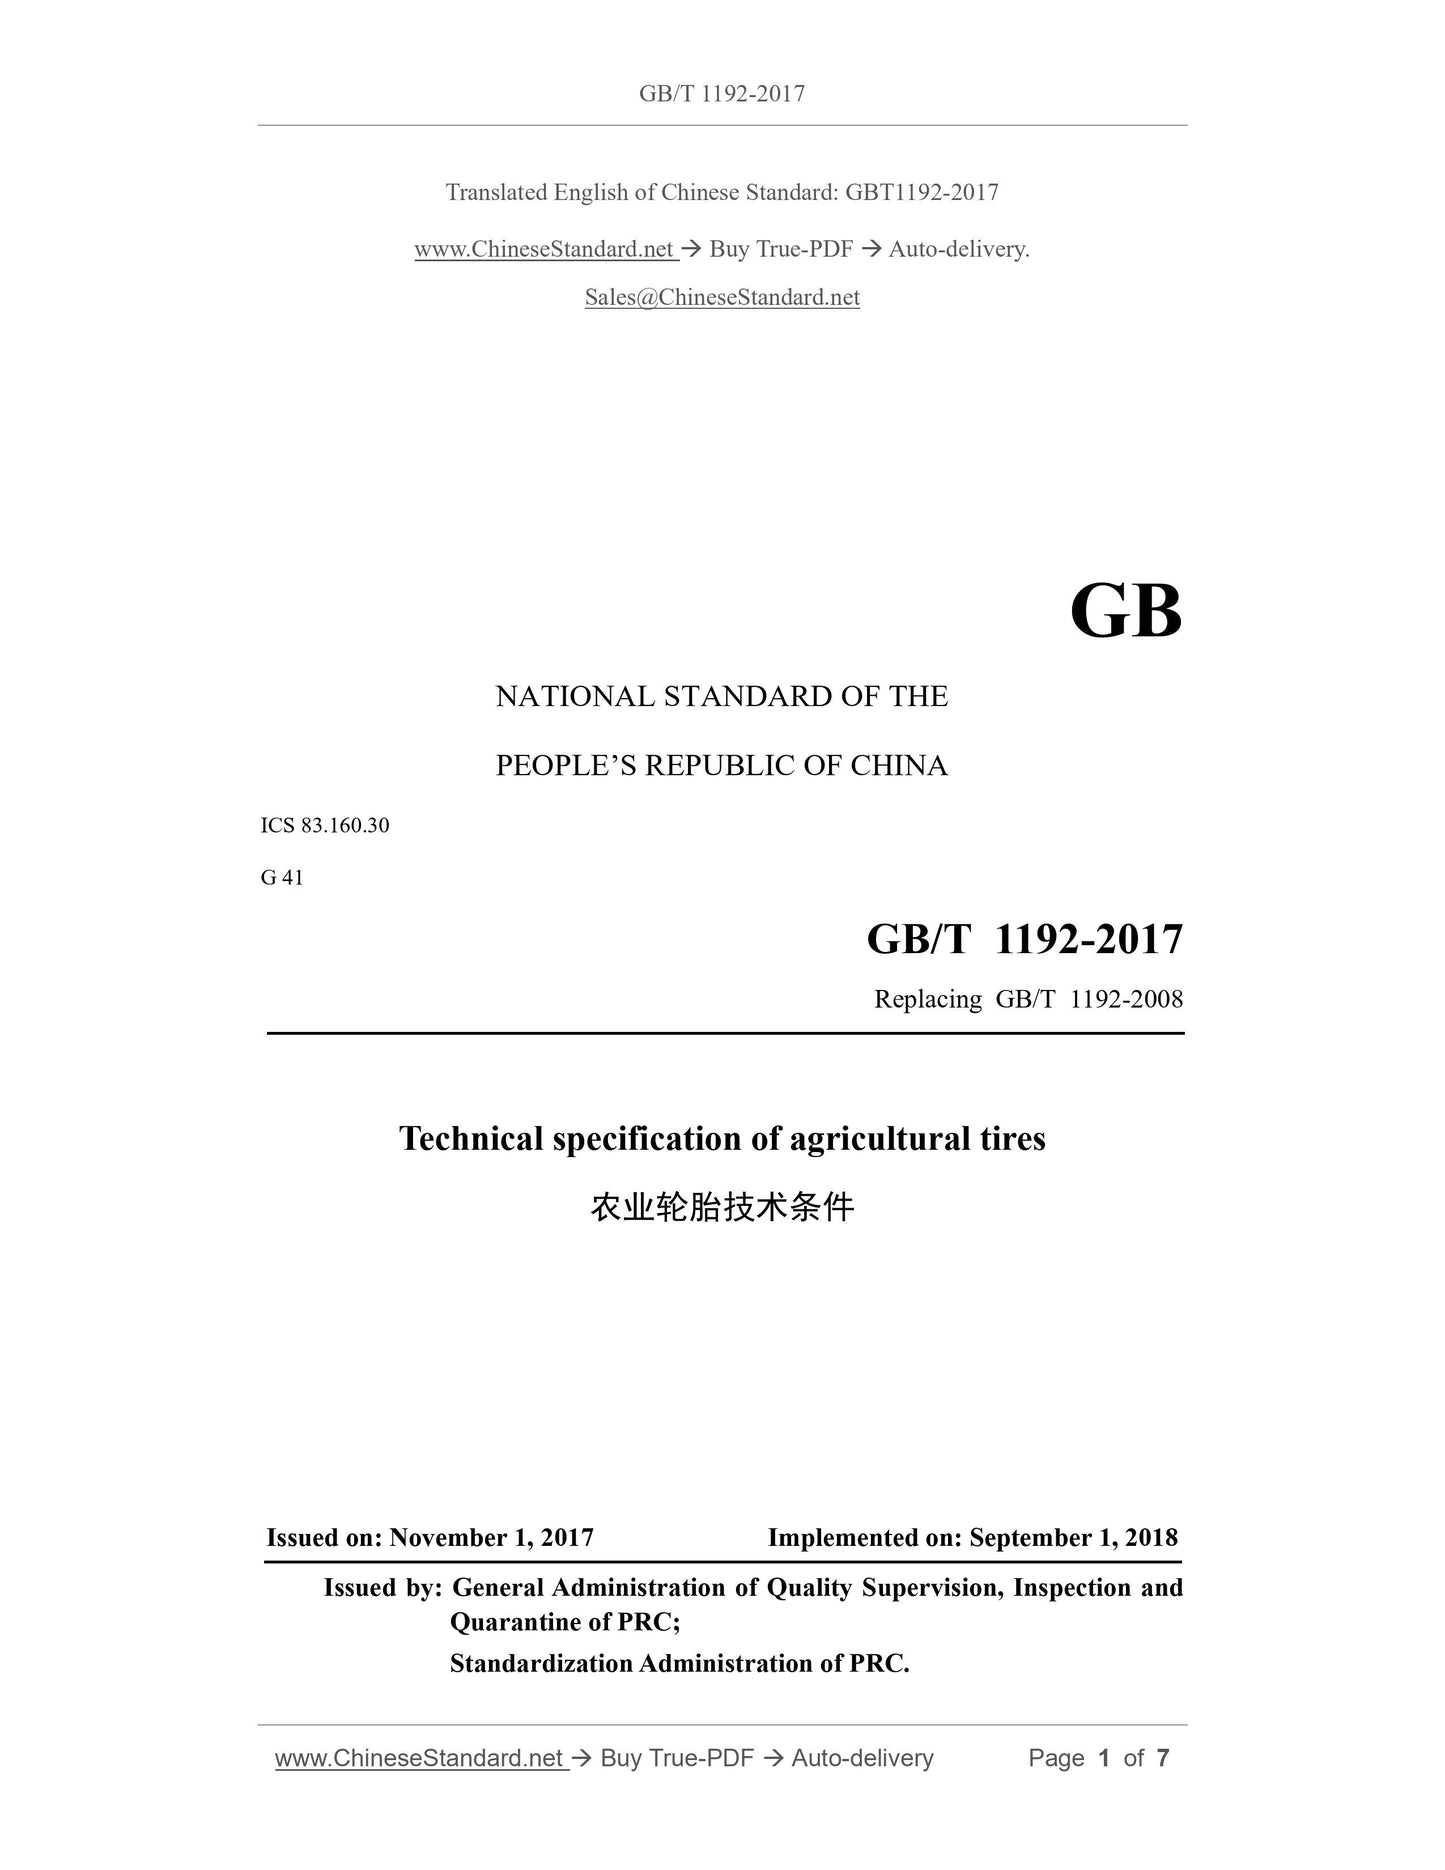 GB/T 1192-2017 Page 1